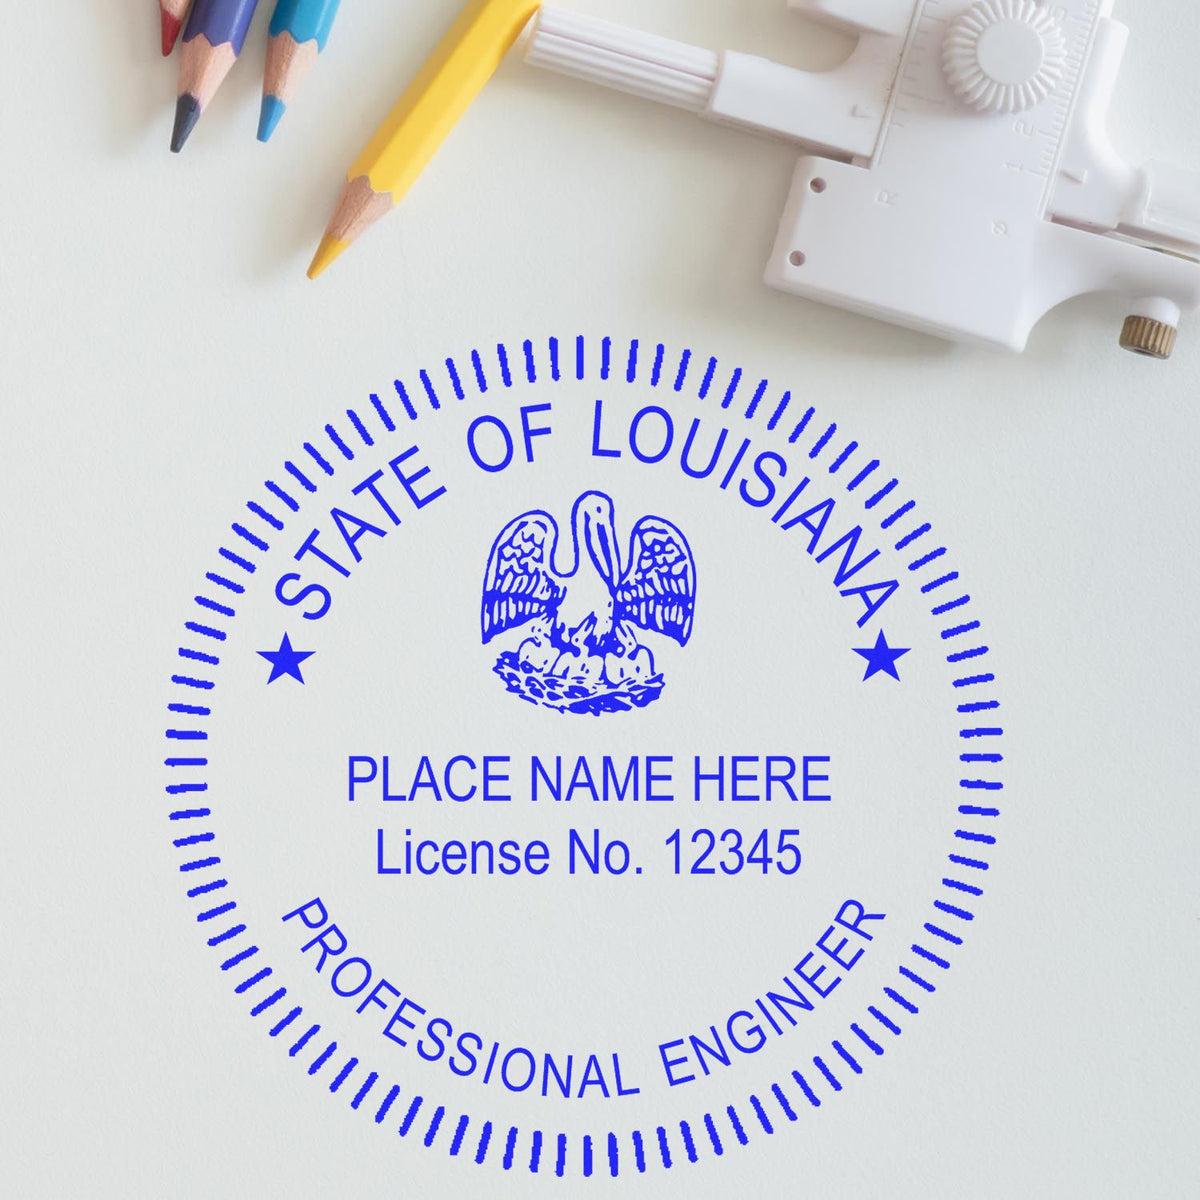 The Digital Louisiana PE Stamp and Electronic Seal for Louisiana Engineer stamp impression comes to life with a crisp, detailed photo on paper - showcasing true professional quality.